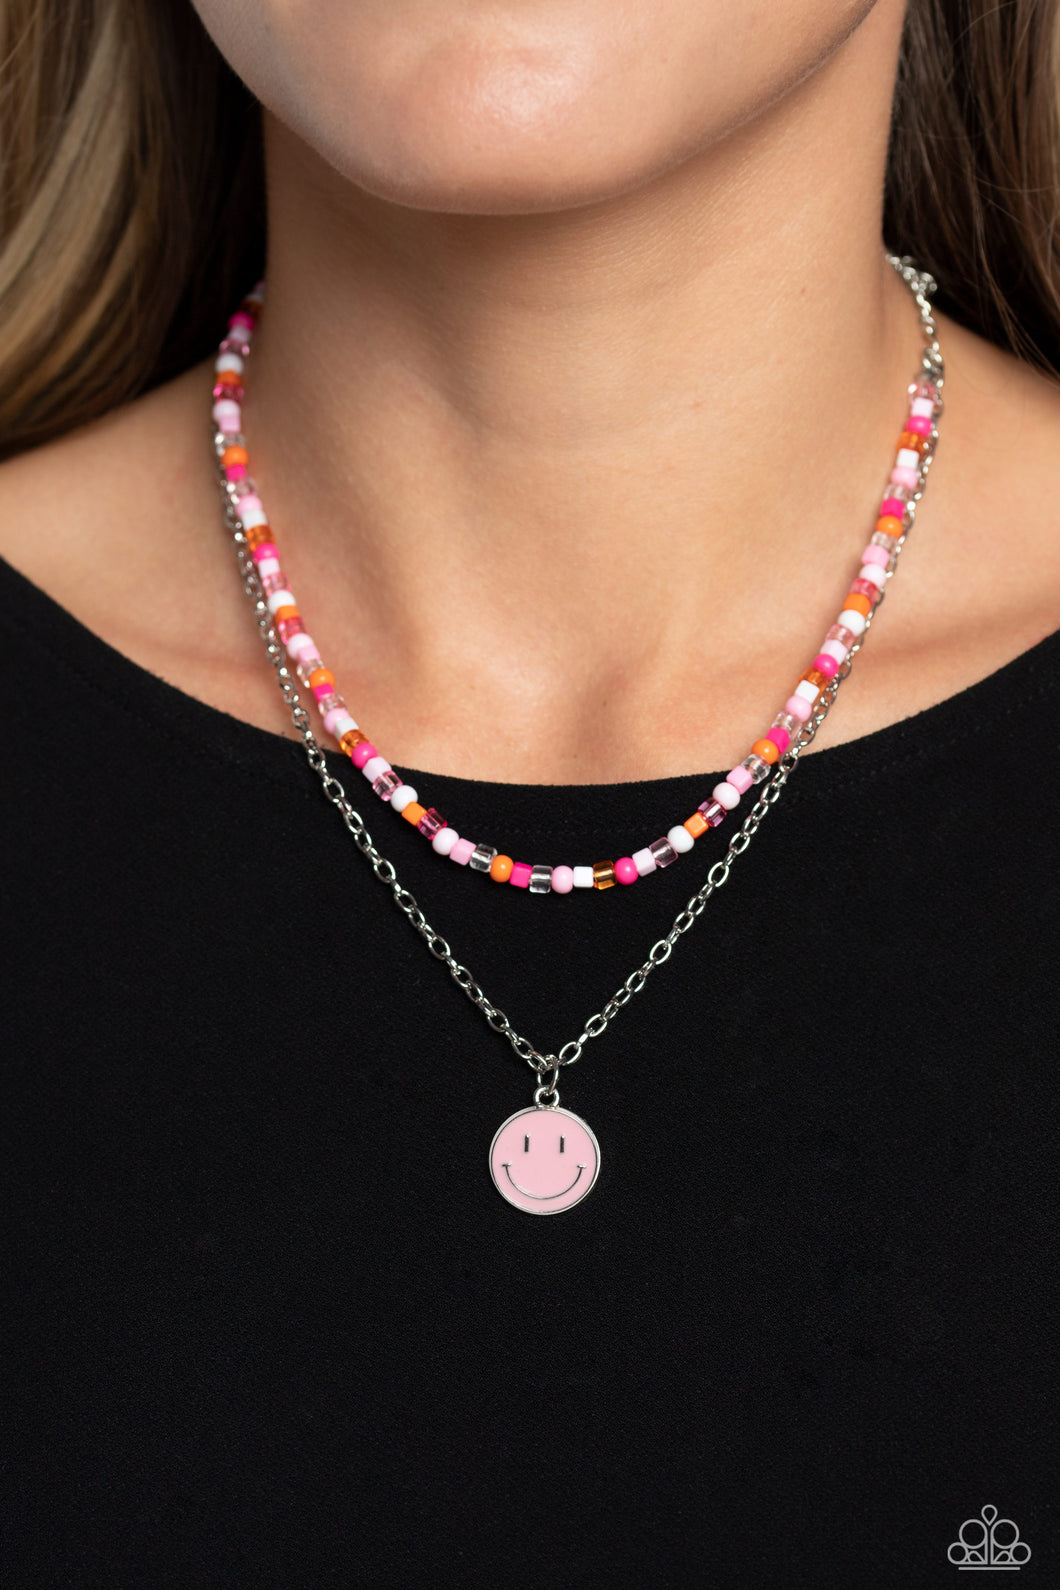 High School Reunion - Pink Multicolored Necklace- Paparazzi Accessories